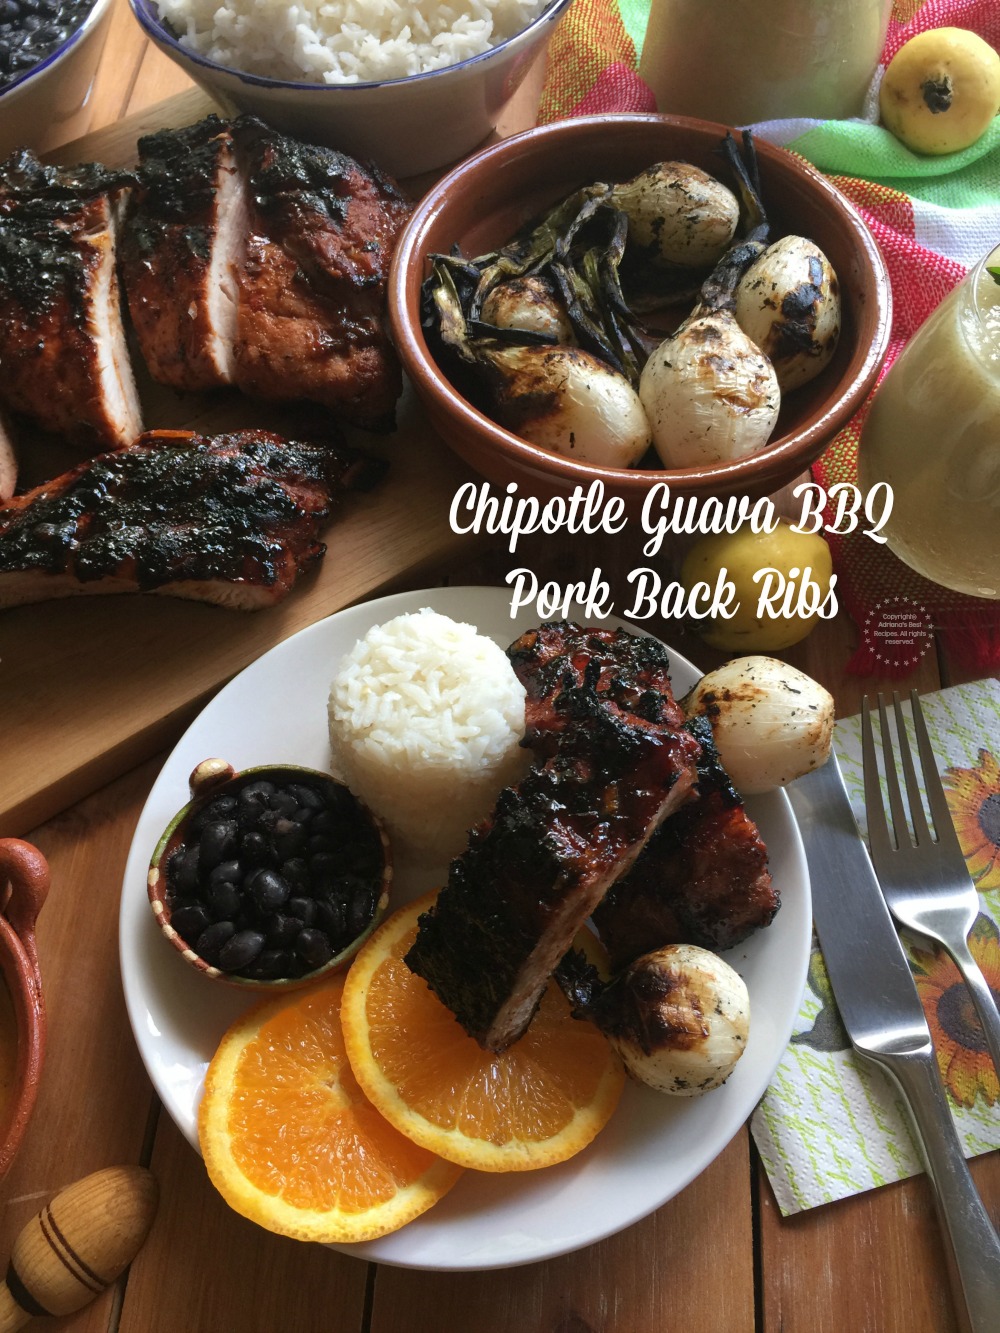 A tablescape showcasing a complete meal with chipotle guava pork back ribs